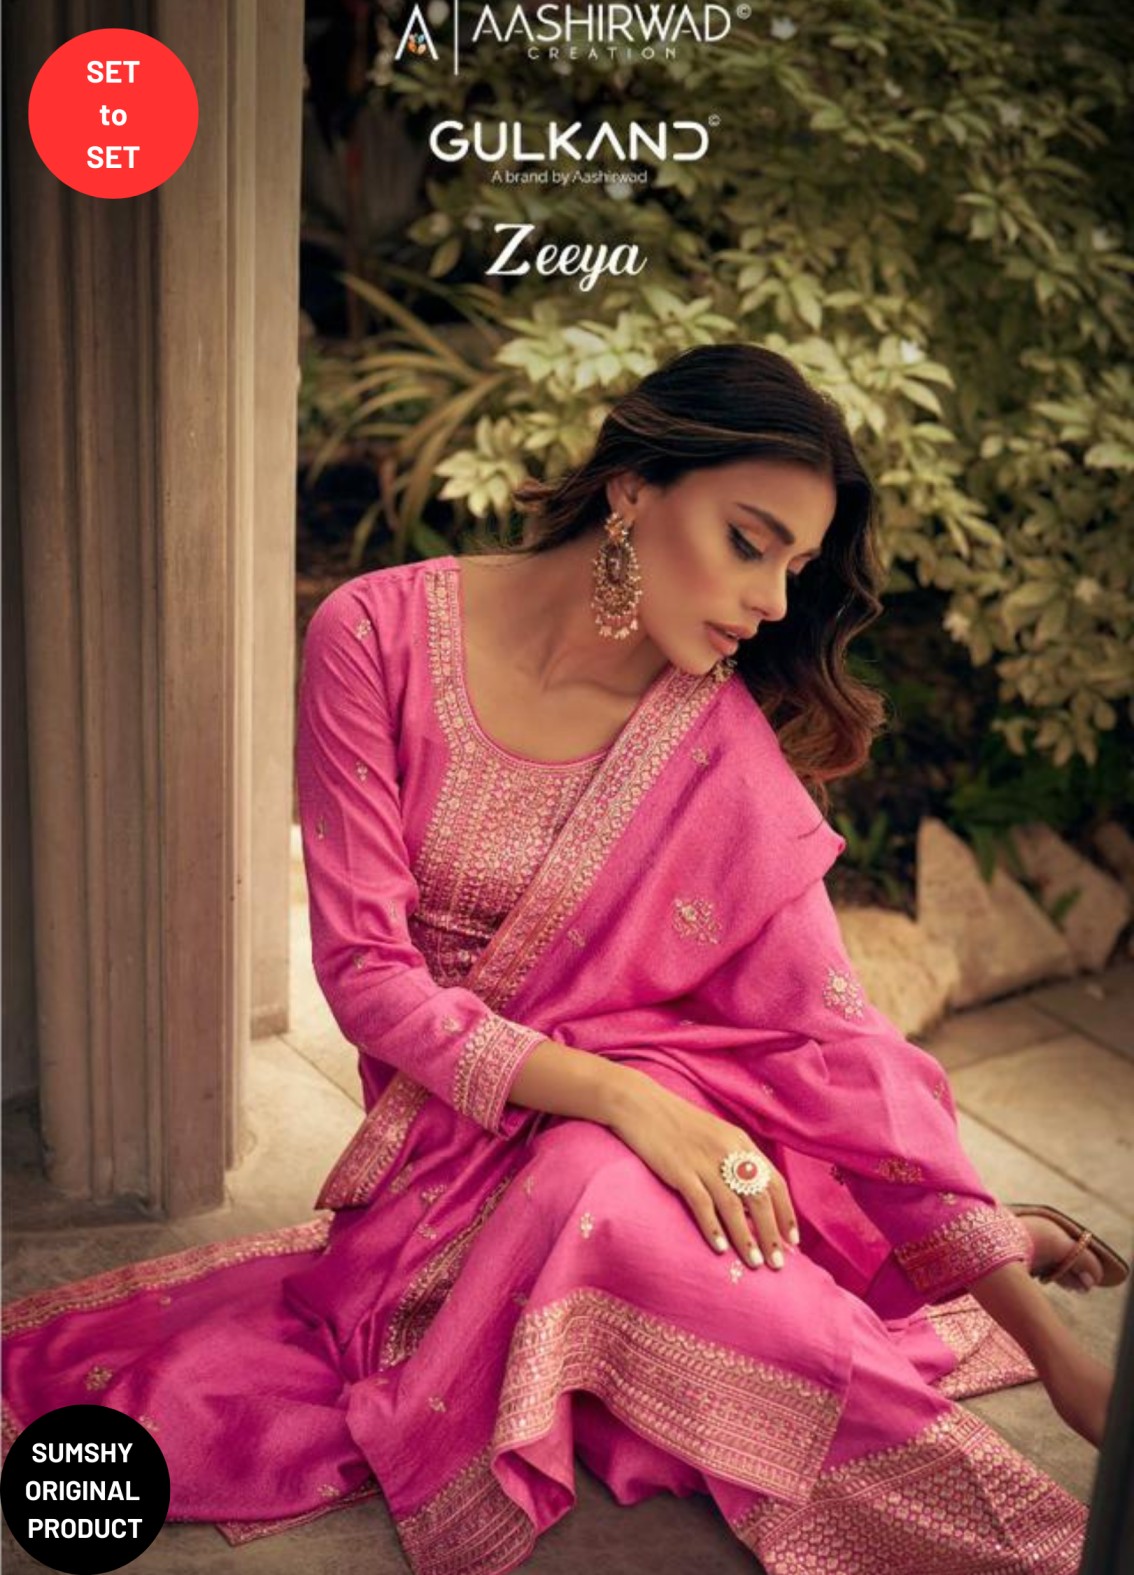 Zivame - Draping yourself in an elegant saree is now quite